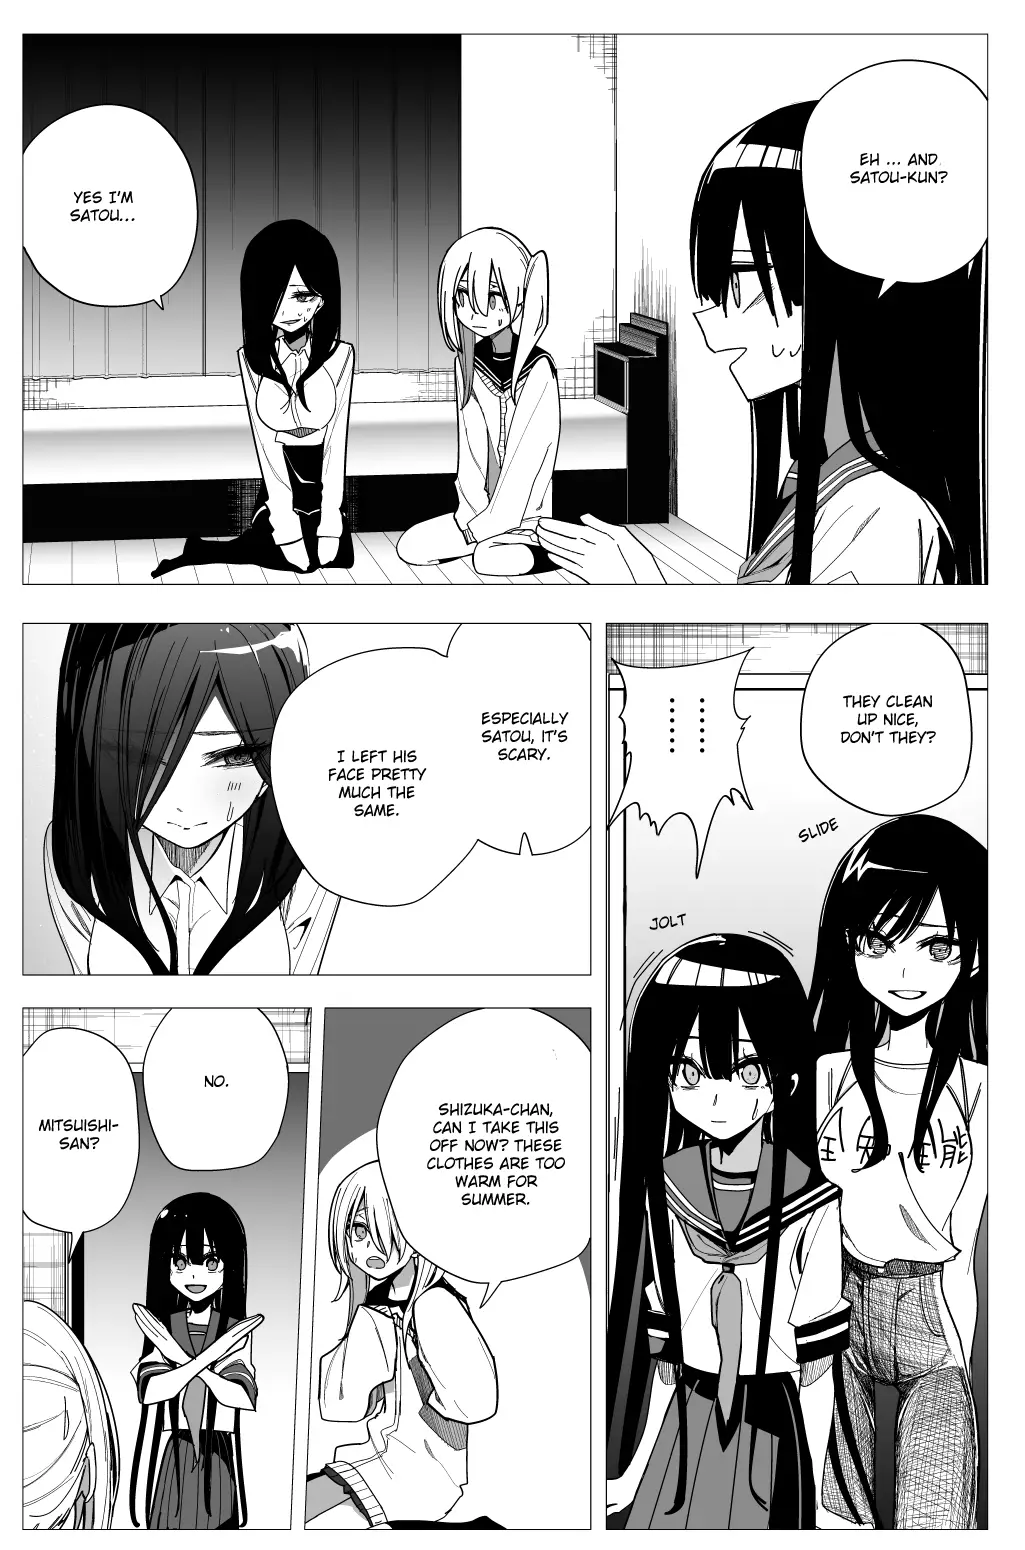 Mitsuishi-San Is Being Weird This Year - 27 page 19-18b888bd